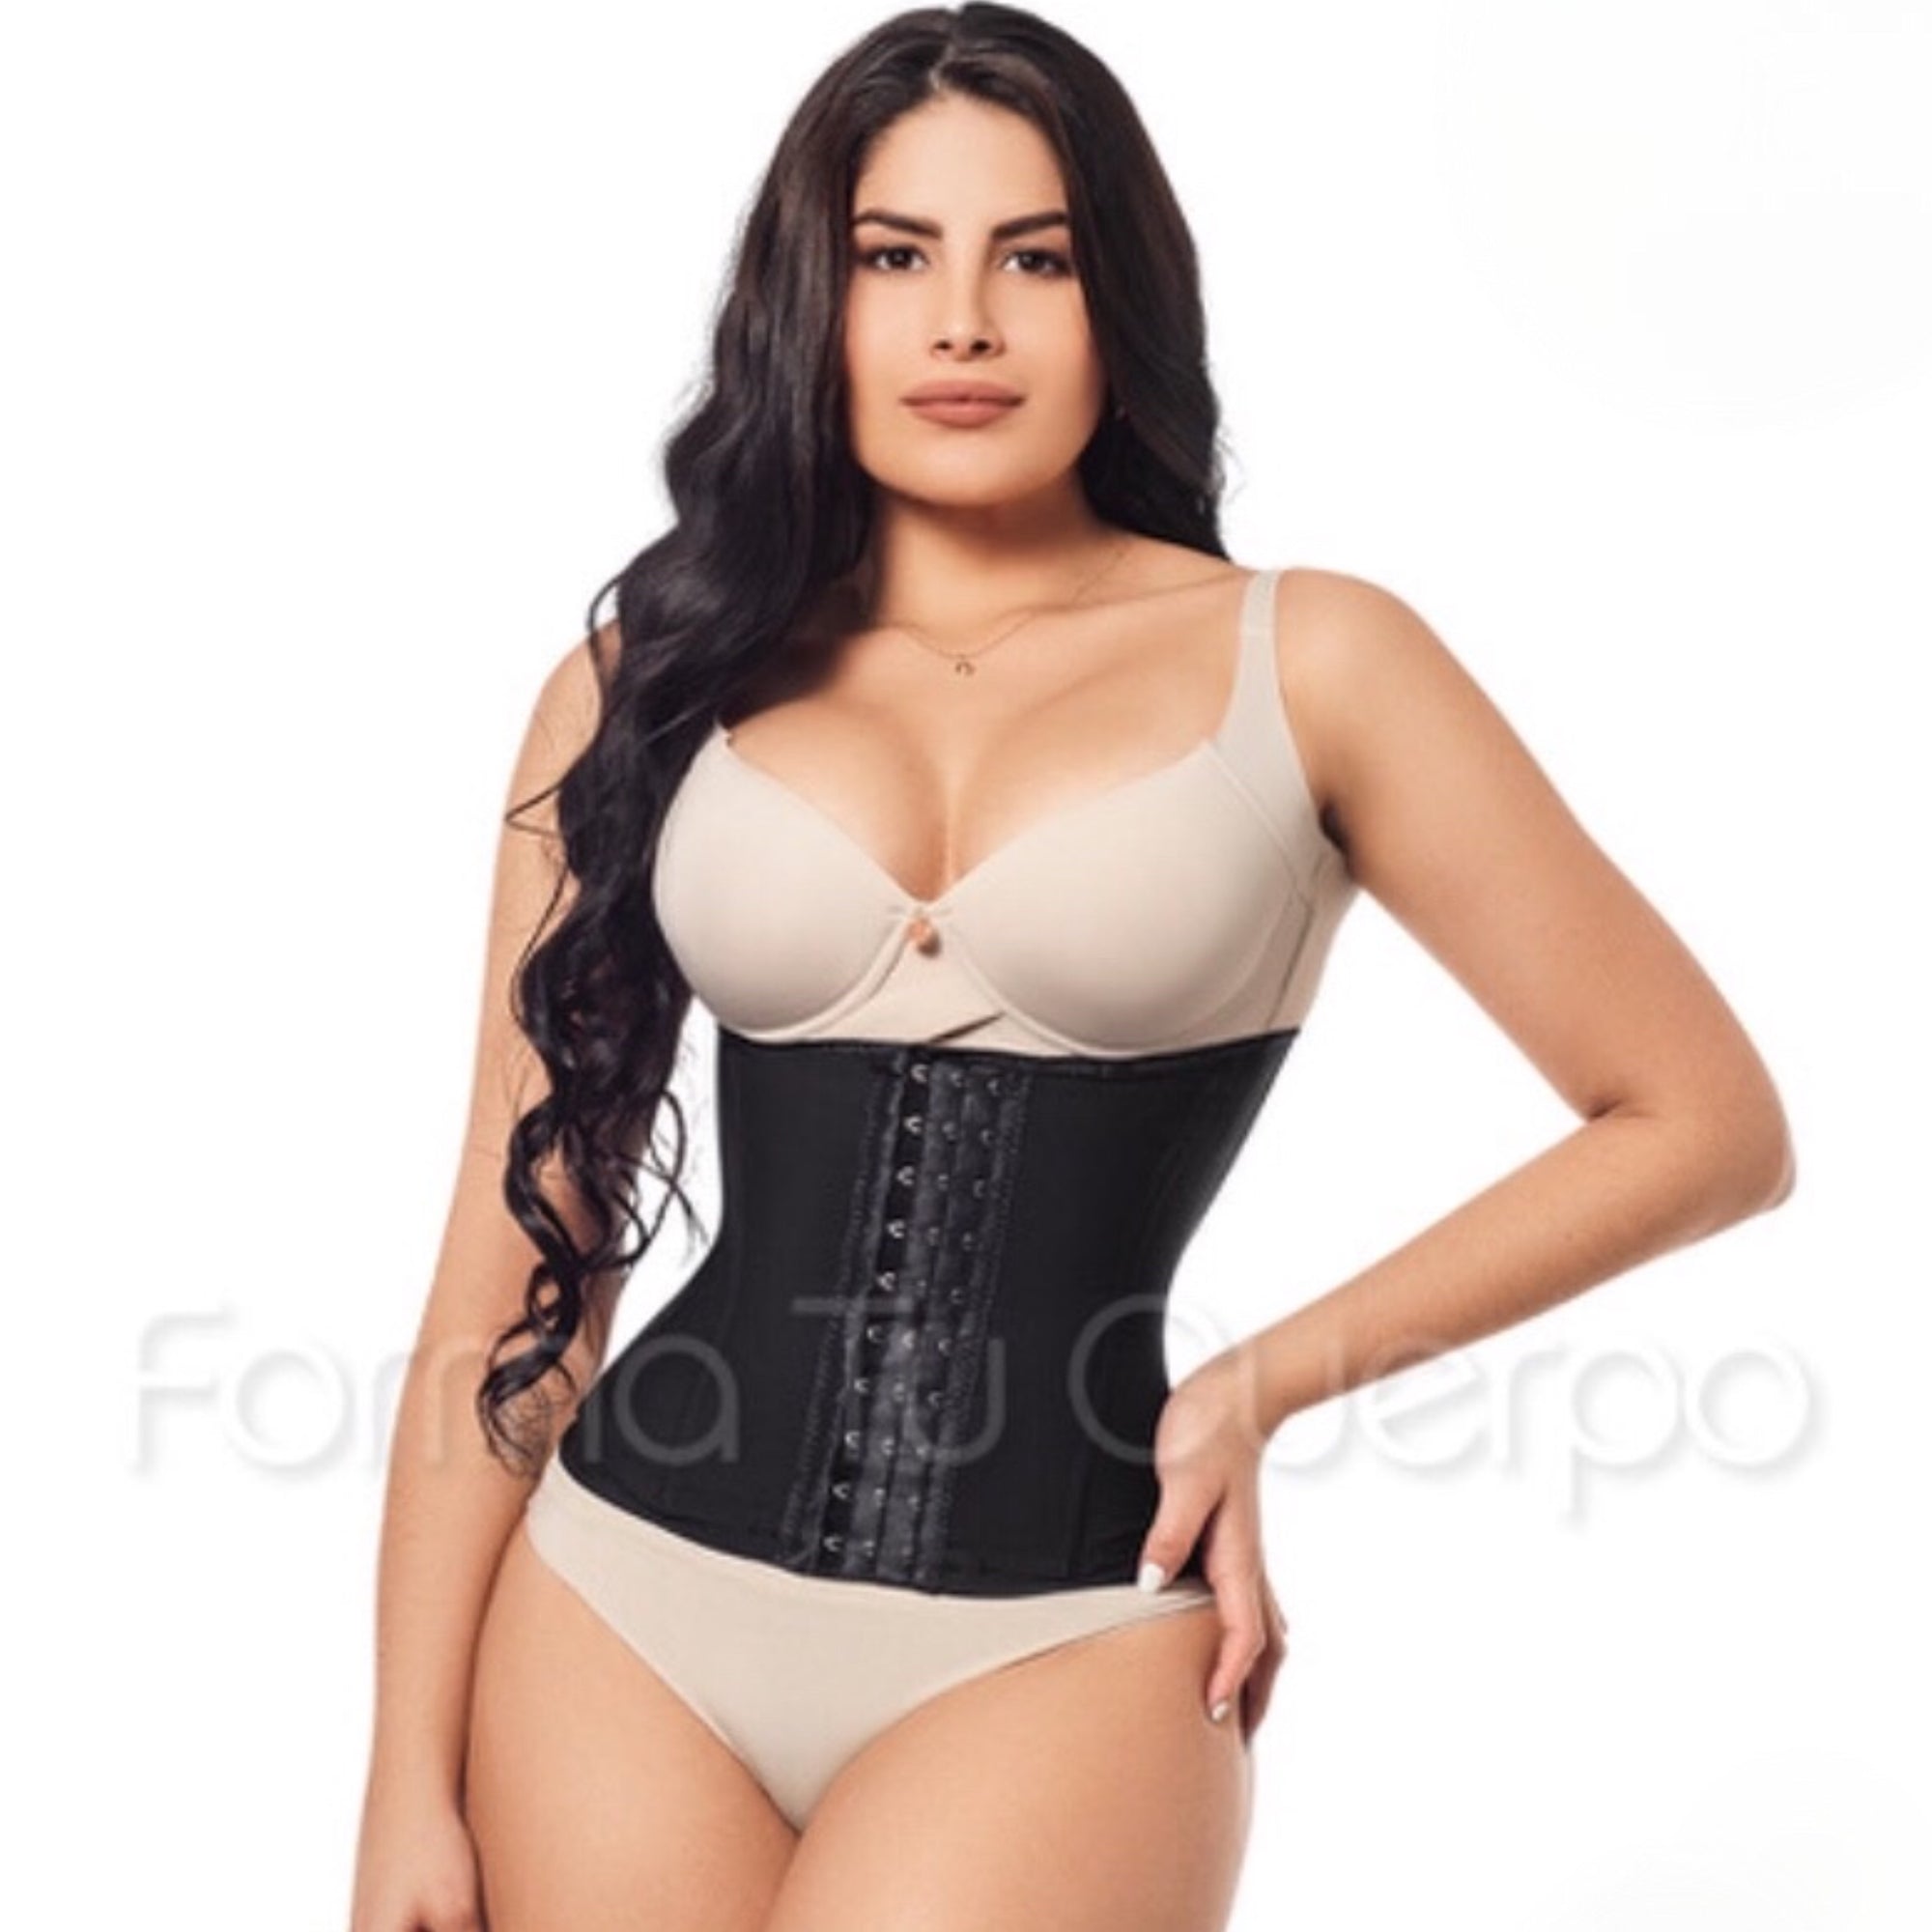 Nicki High Waist Faux Leather Corset Cincher Pants – The Twisted